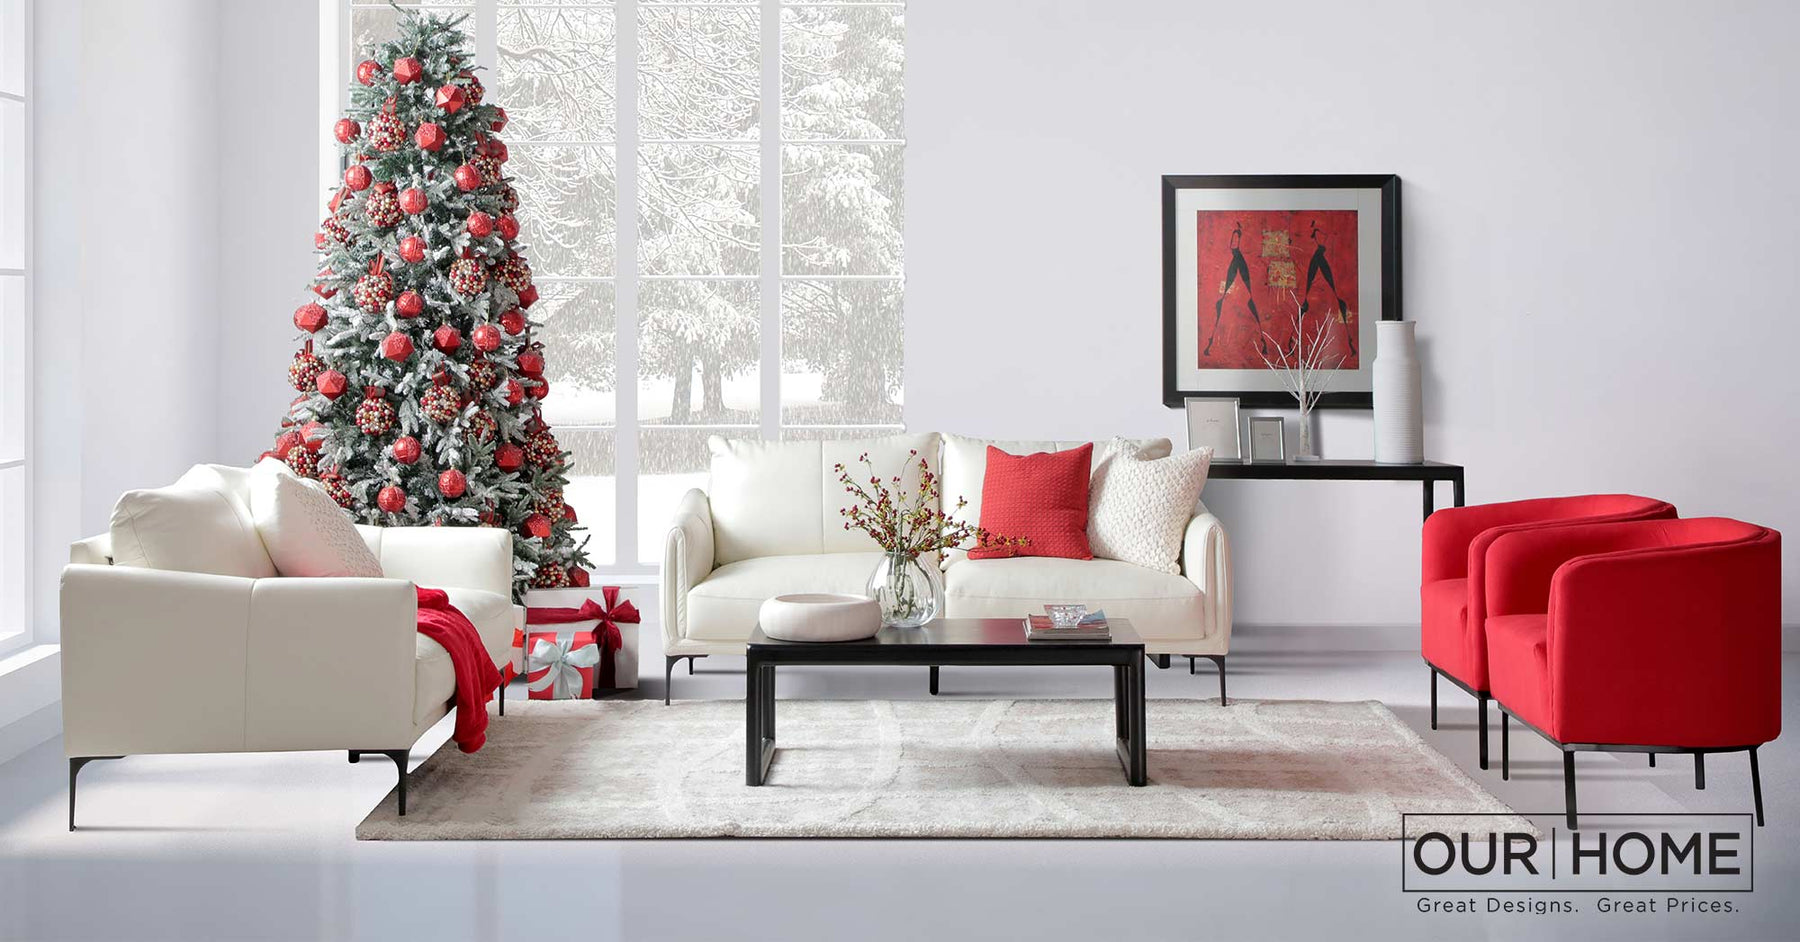 Preparing Your Home for Christmas